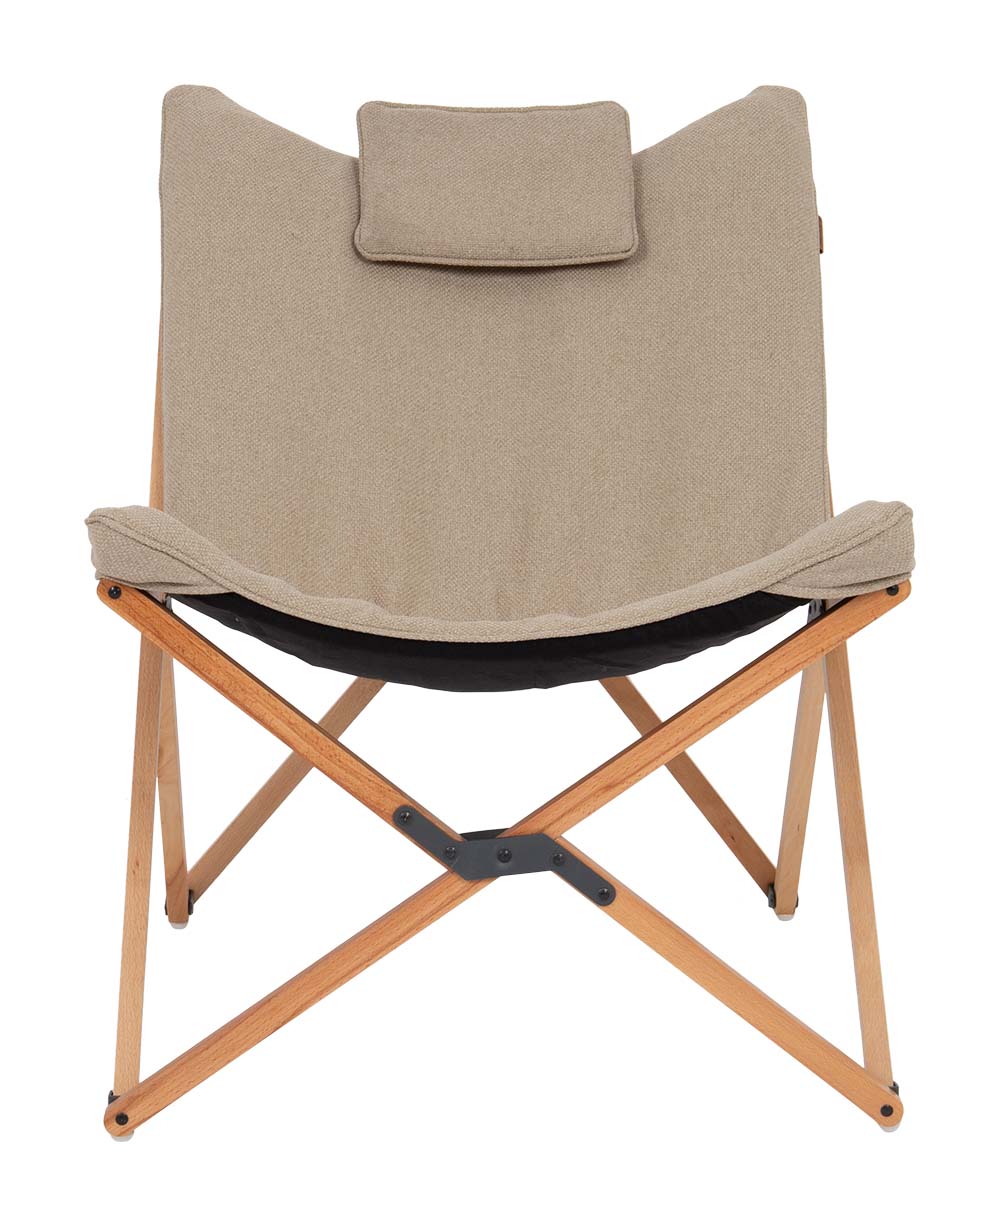 Bo-Camp - Urban Outdoor collection - Relaxsessel - Wembley - M - Nika - Beige detail 2